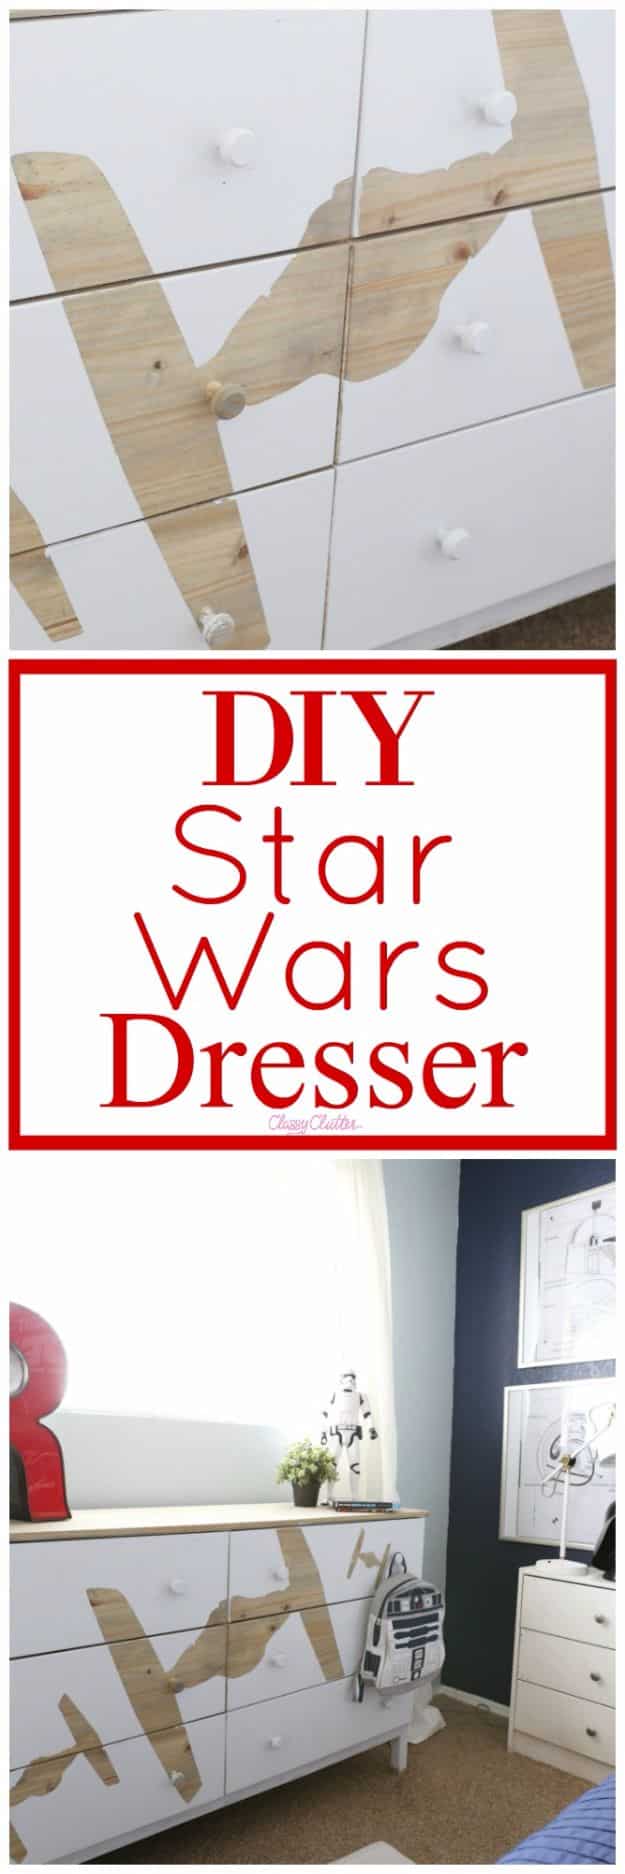 DIY Dressers - DIY Star Wars Dresser - Simple DIY Dresser Ideas - Easy Dresser Upgrades and Makeovers to Create Cool Bedroom Decor On A Budget- Do It Yourself Tutorials and Instructions for Decorating Cheap Furniture - Crafts for Women, Men and Teens http://diyjoy.com/diy-dresser-ideas